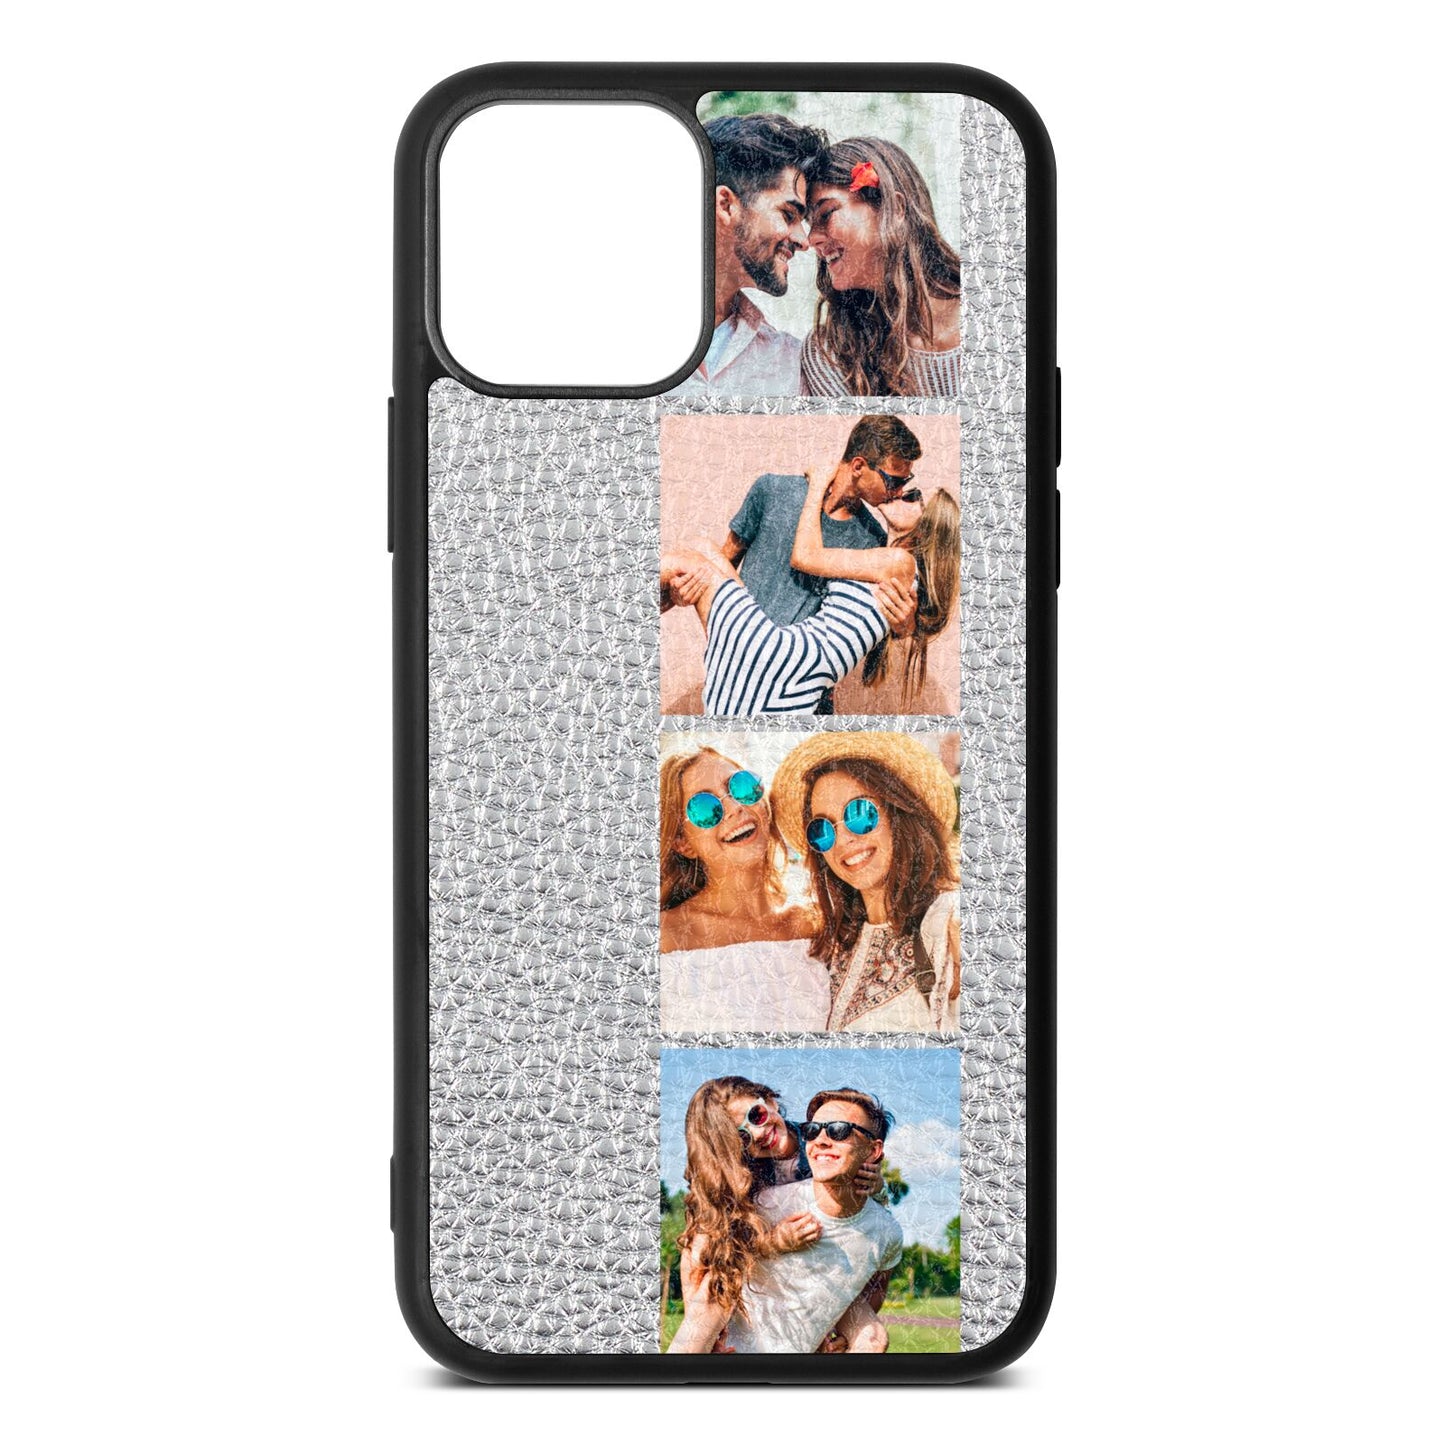 Photo Strip Montage Upload Silver Pebble Leather iPhone 11 Pro Case